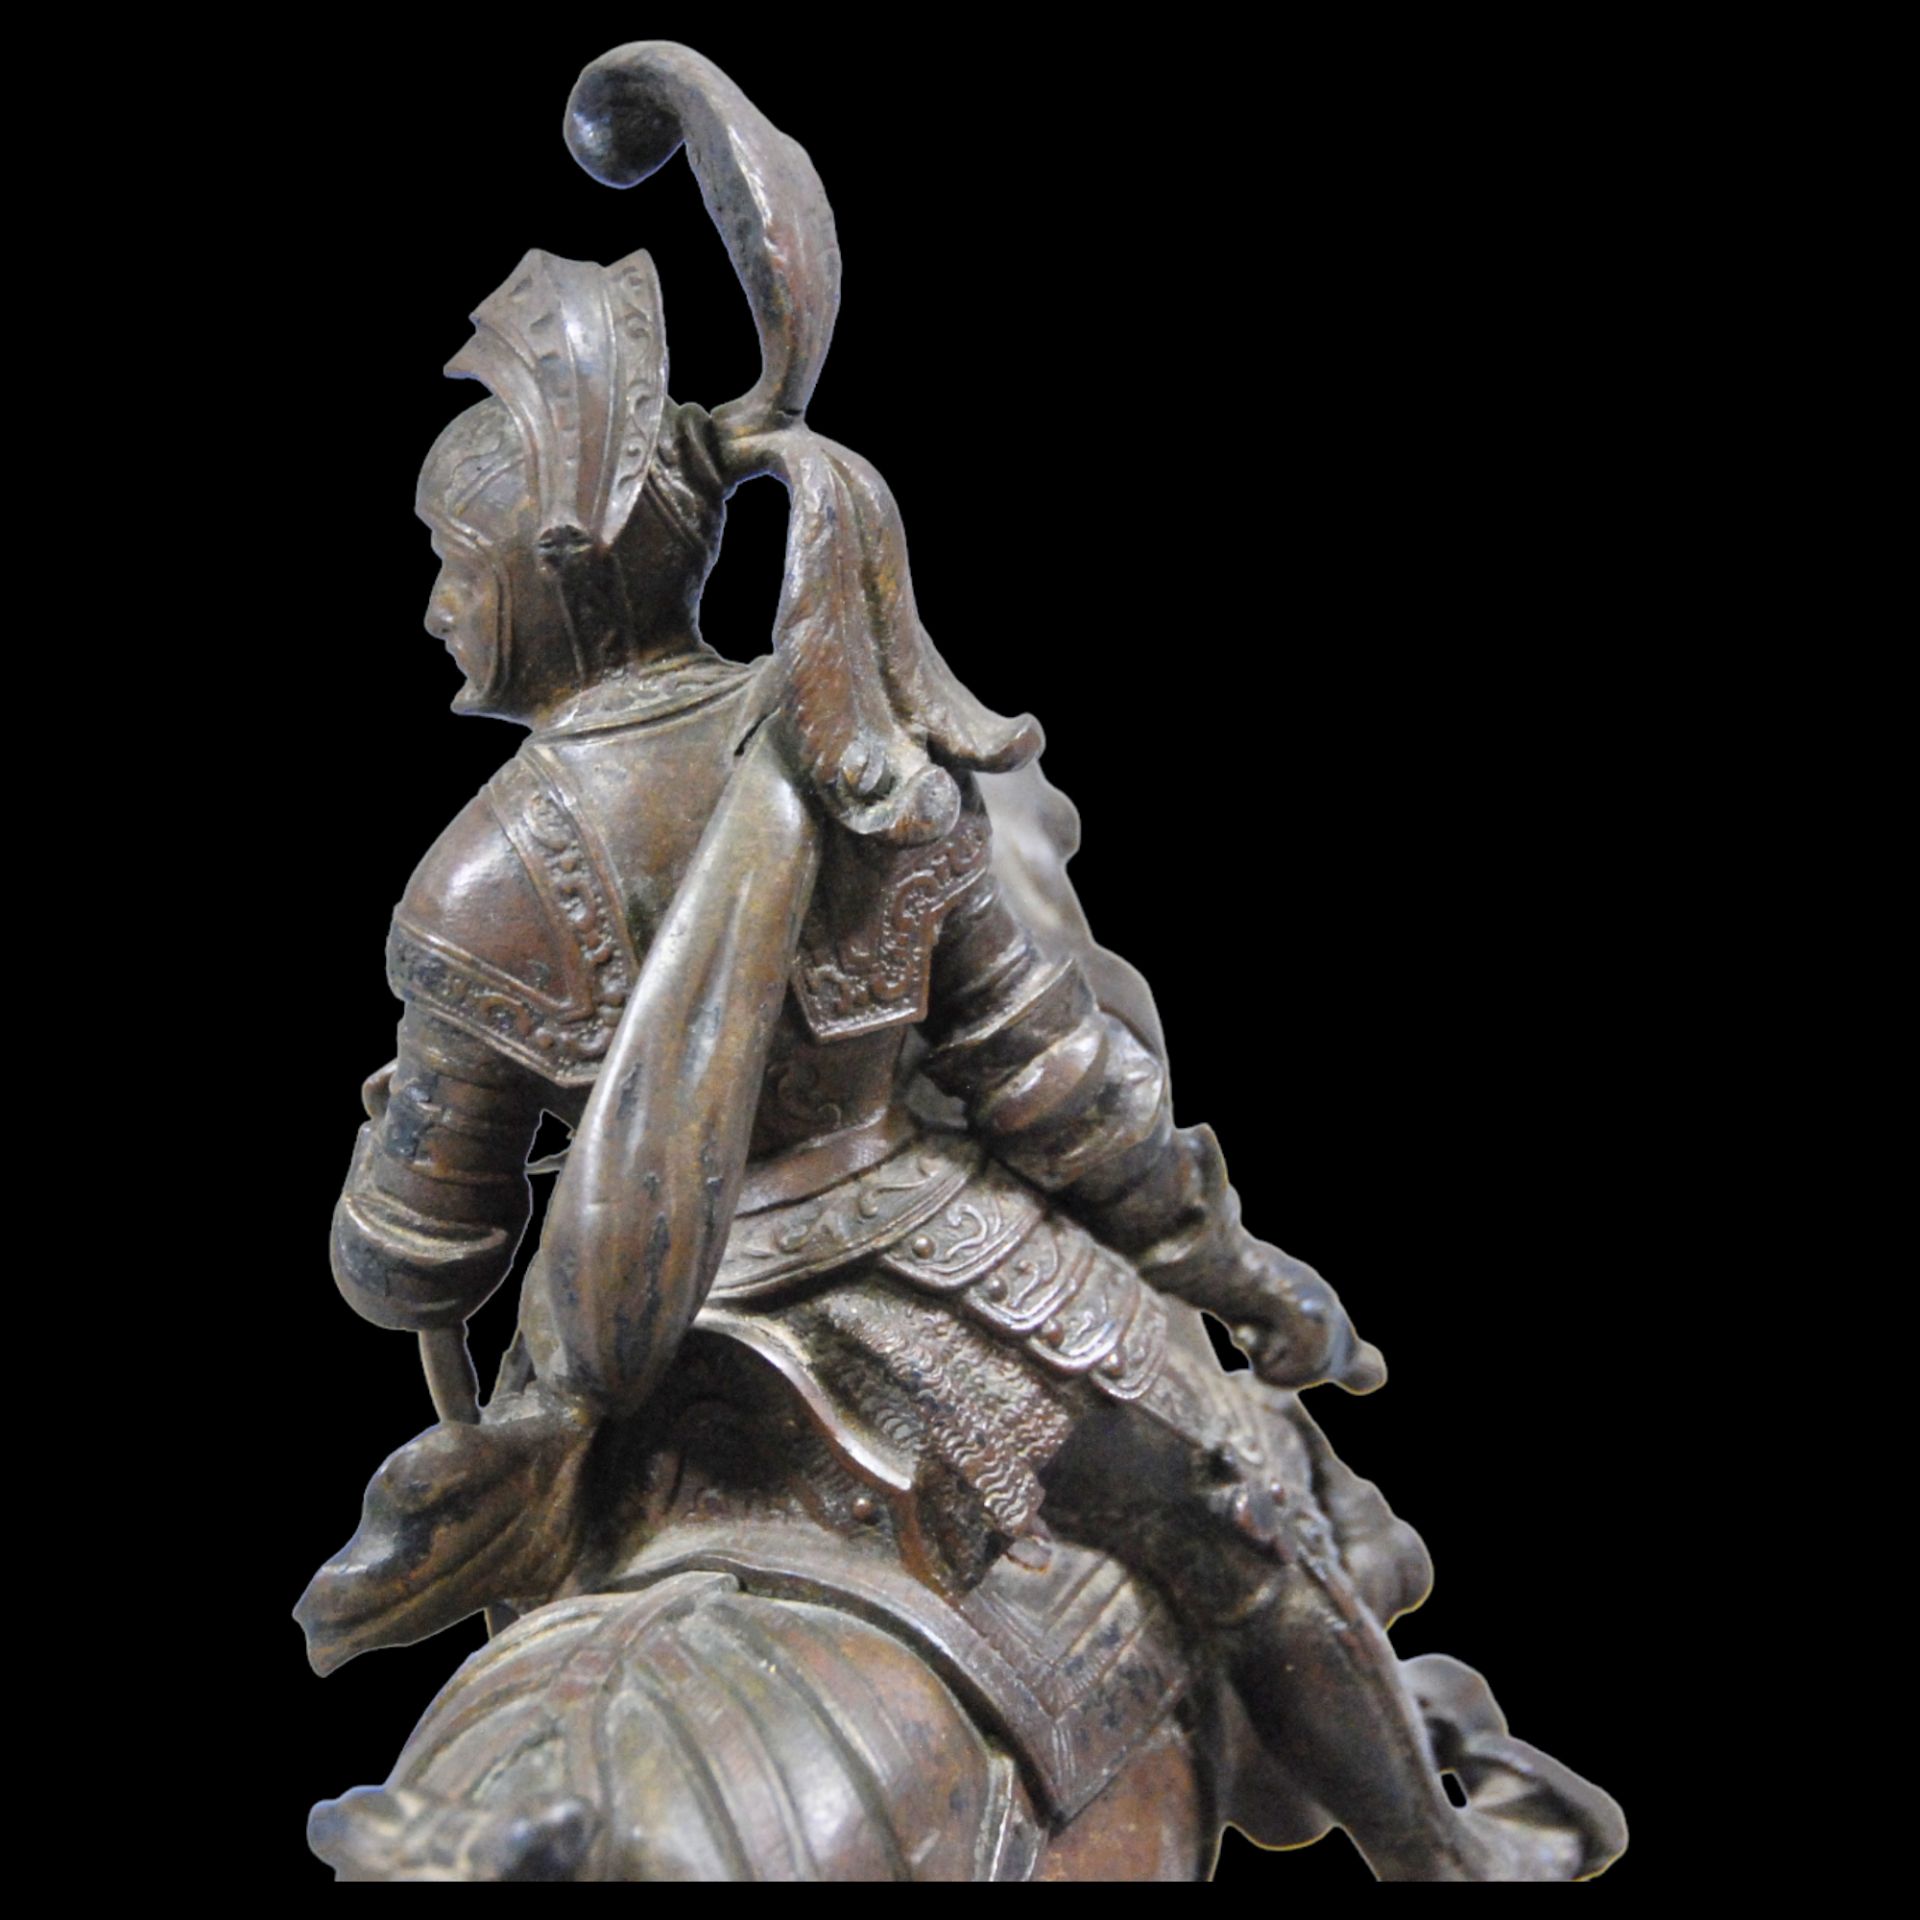 A bronze composition depicting an equestrian knight of the medieval period at a tournament. - Image 11 of 12